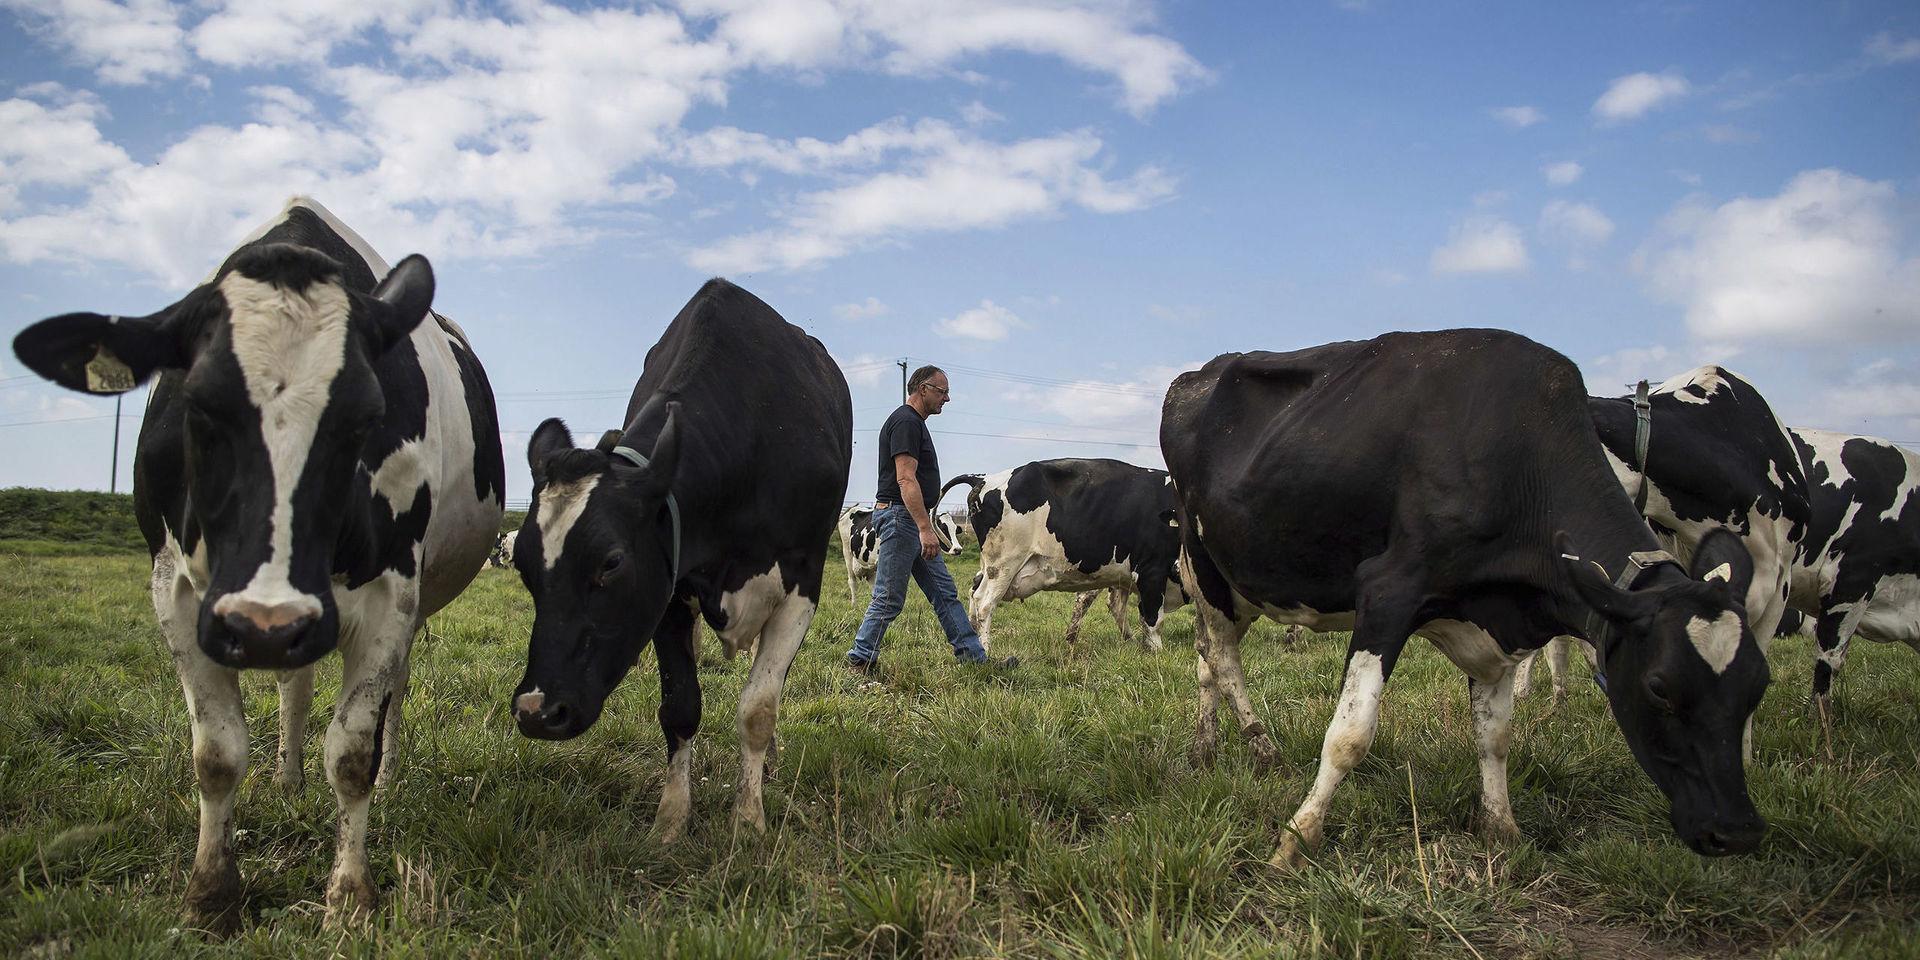 Second-generation dairy farmer David Janssens walks through a pasture as his dairy cows graze at Nicomekl Farms, in Surrey, British Columbia, Thursday Aug. 30, 2018.  It started with President Donald Trump&apos;s attacks on Canadian dairy farmers. Then Washington slapped tariffs on Canadian steel, citing national security. There was that disastrous G-7 summit in Quebec. Now it&apos;s a new North American free trade agreement that excludes America&apos;s northern neighbor. (Darryl Dyck/The Canadian Press via AP)